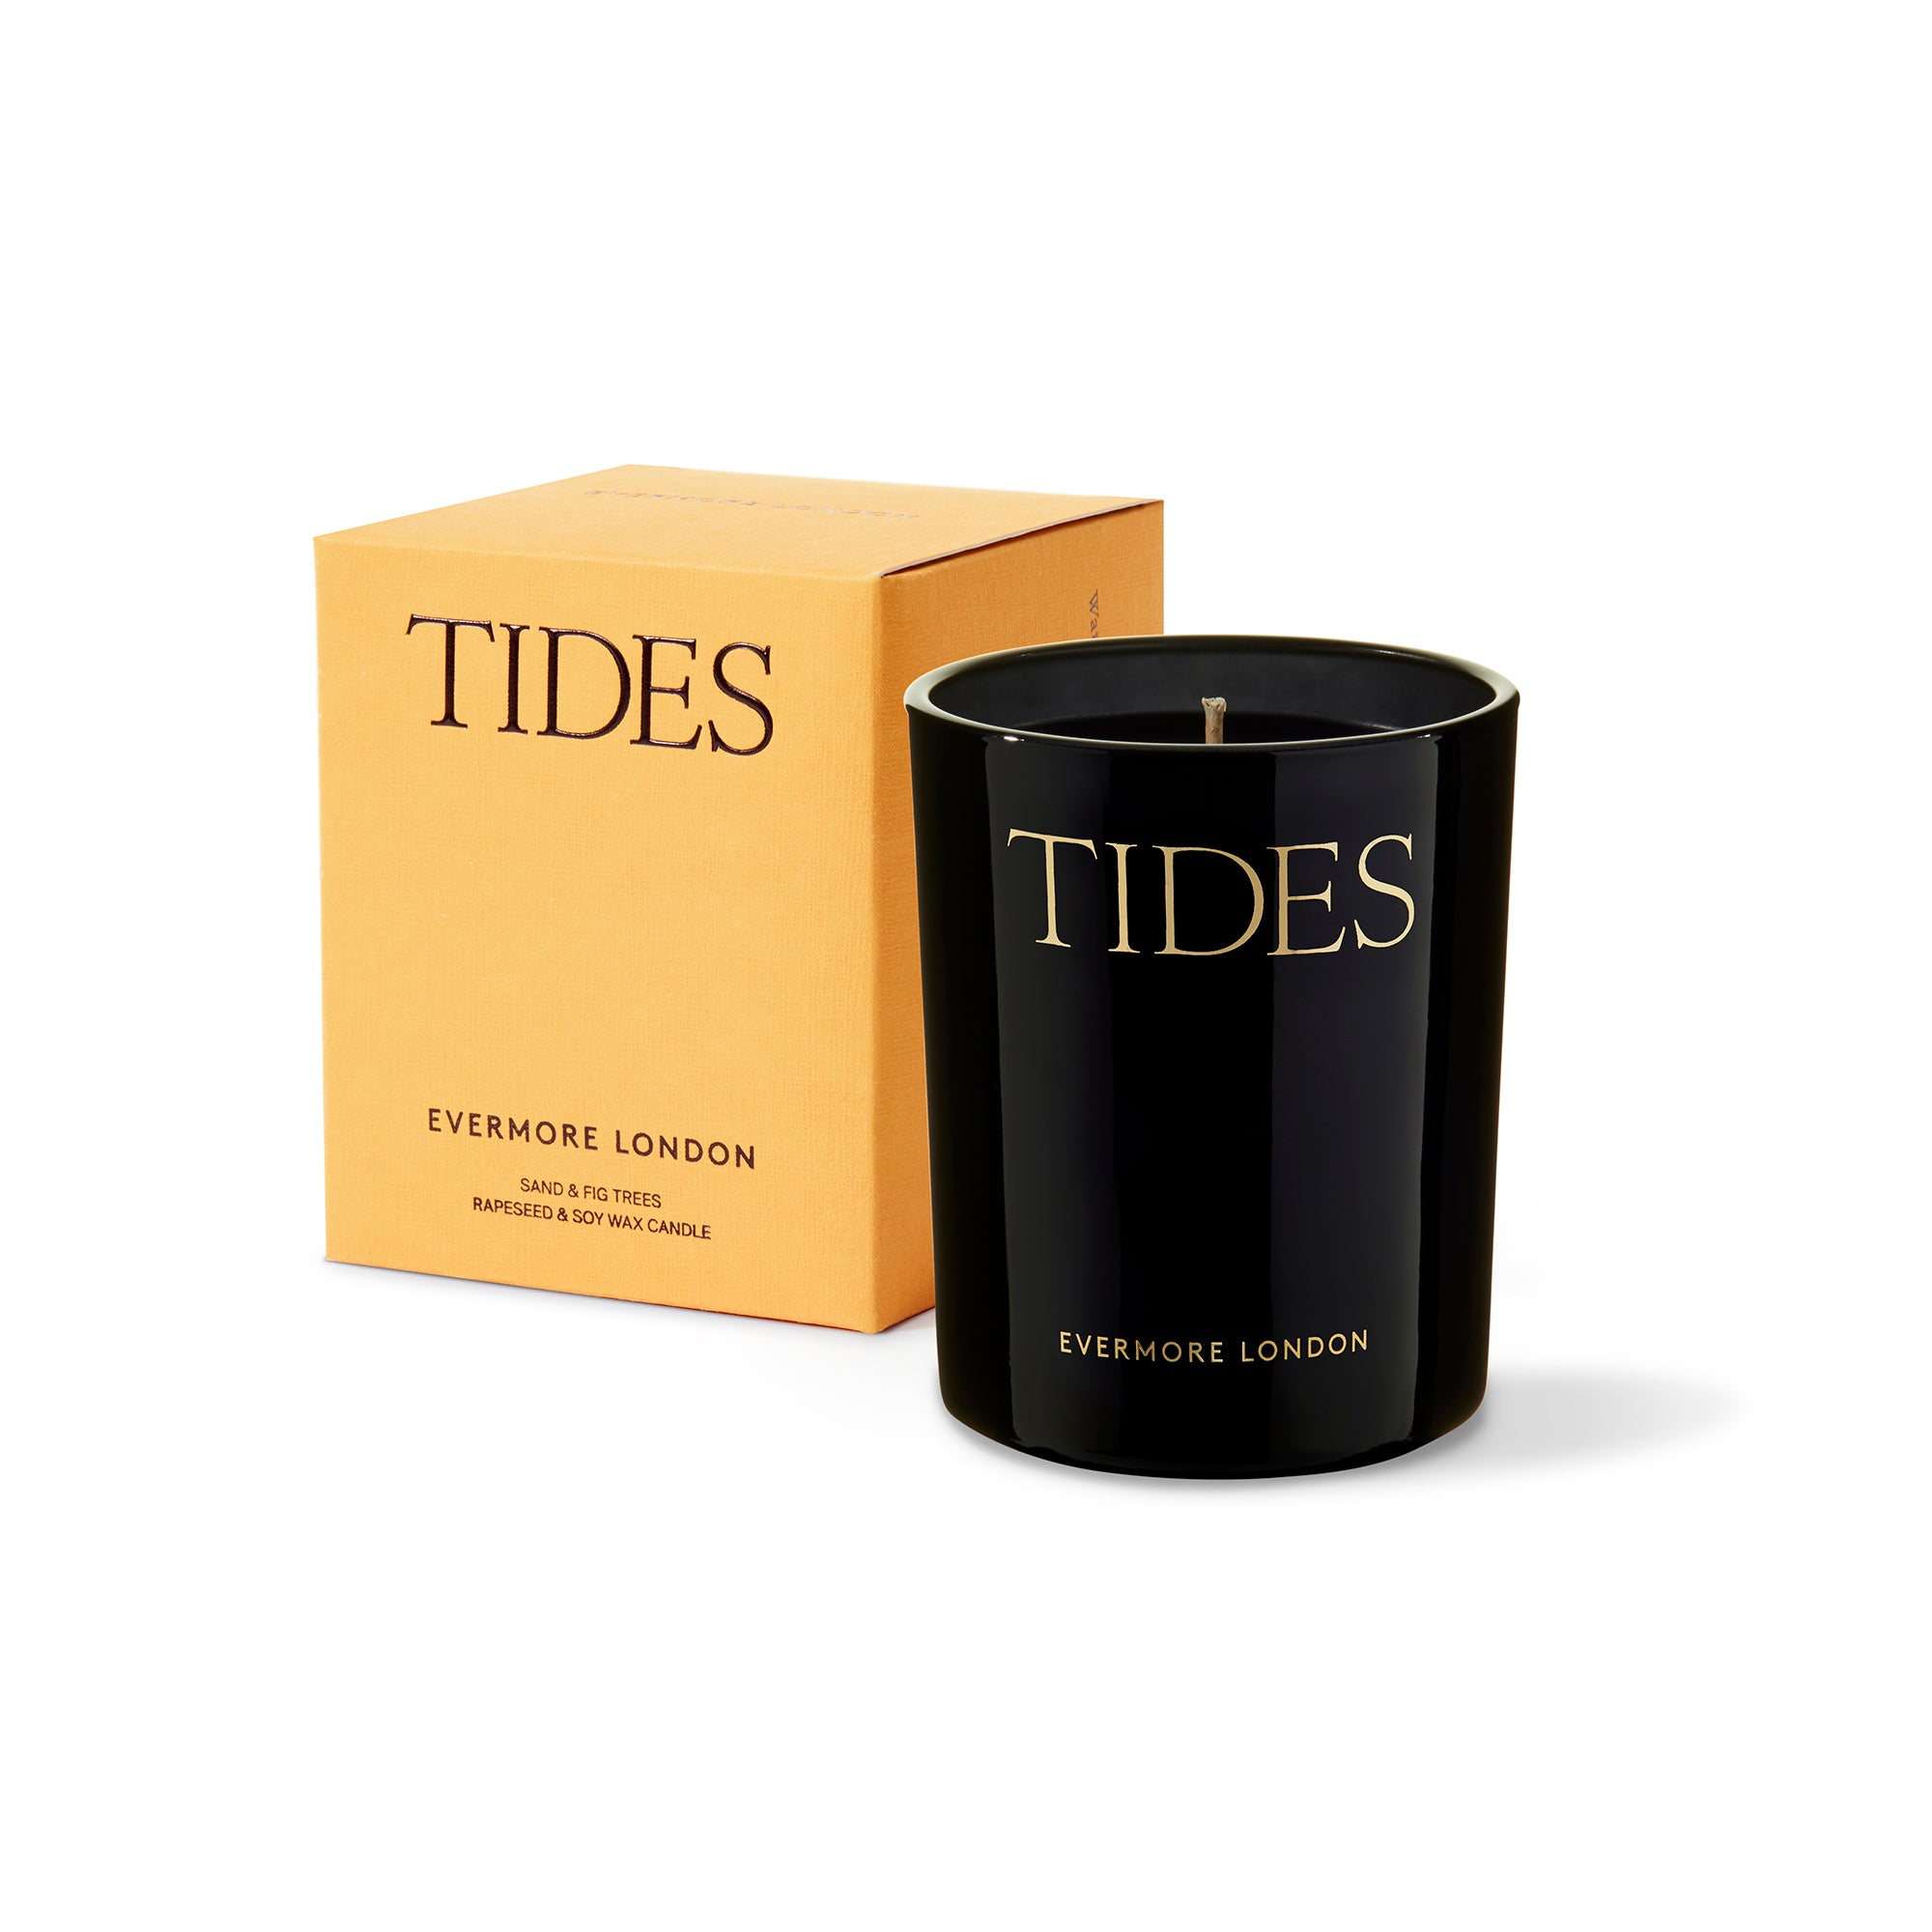 TIDES CANDLE 300g